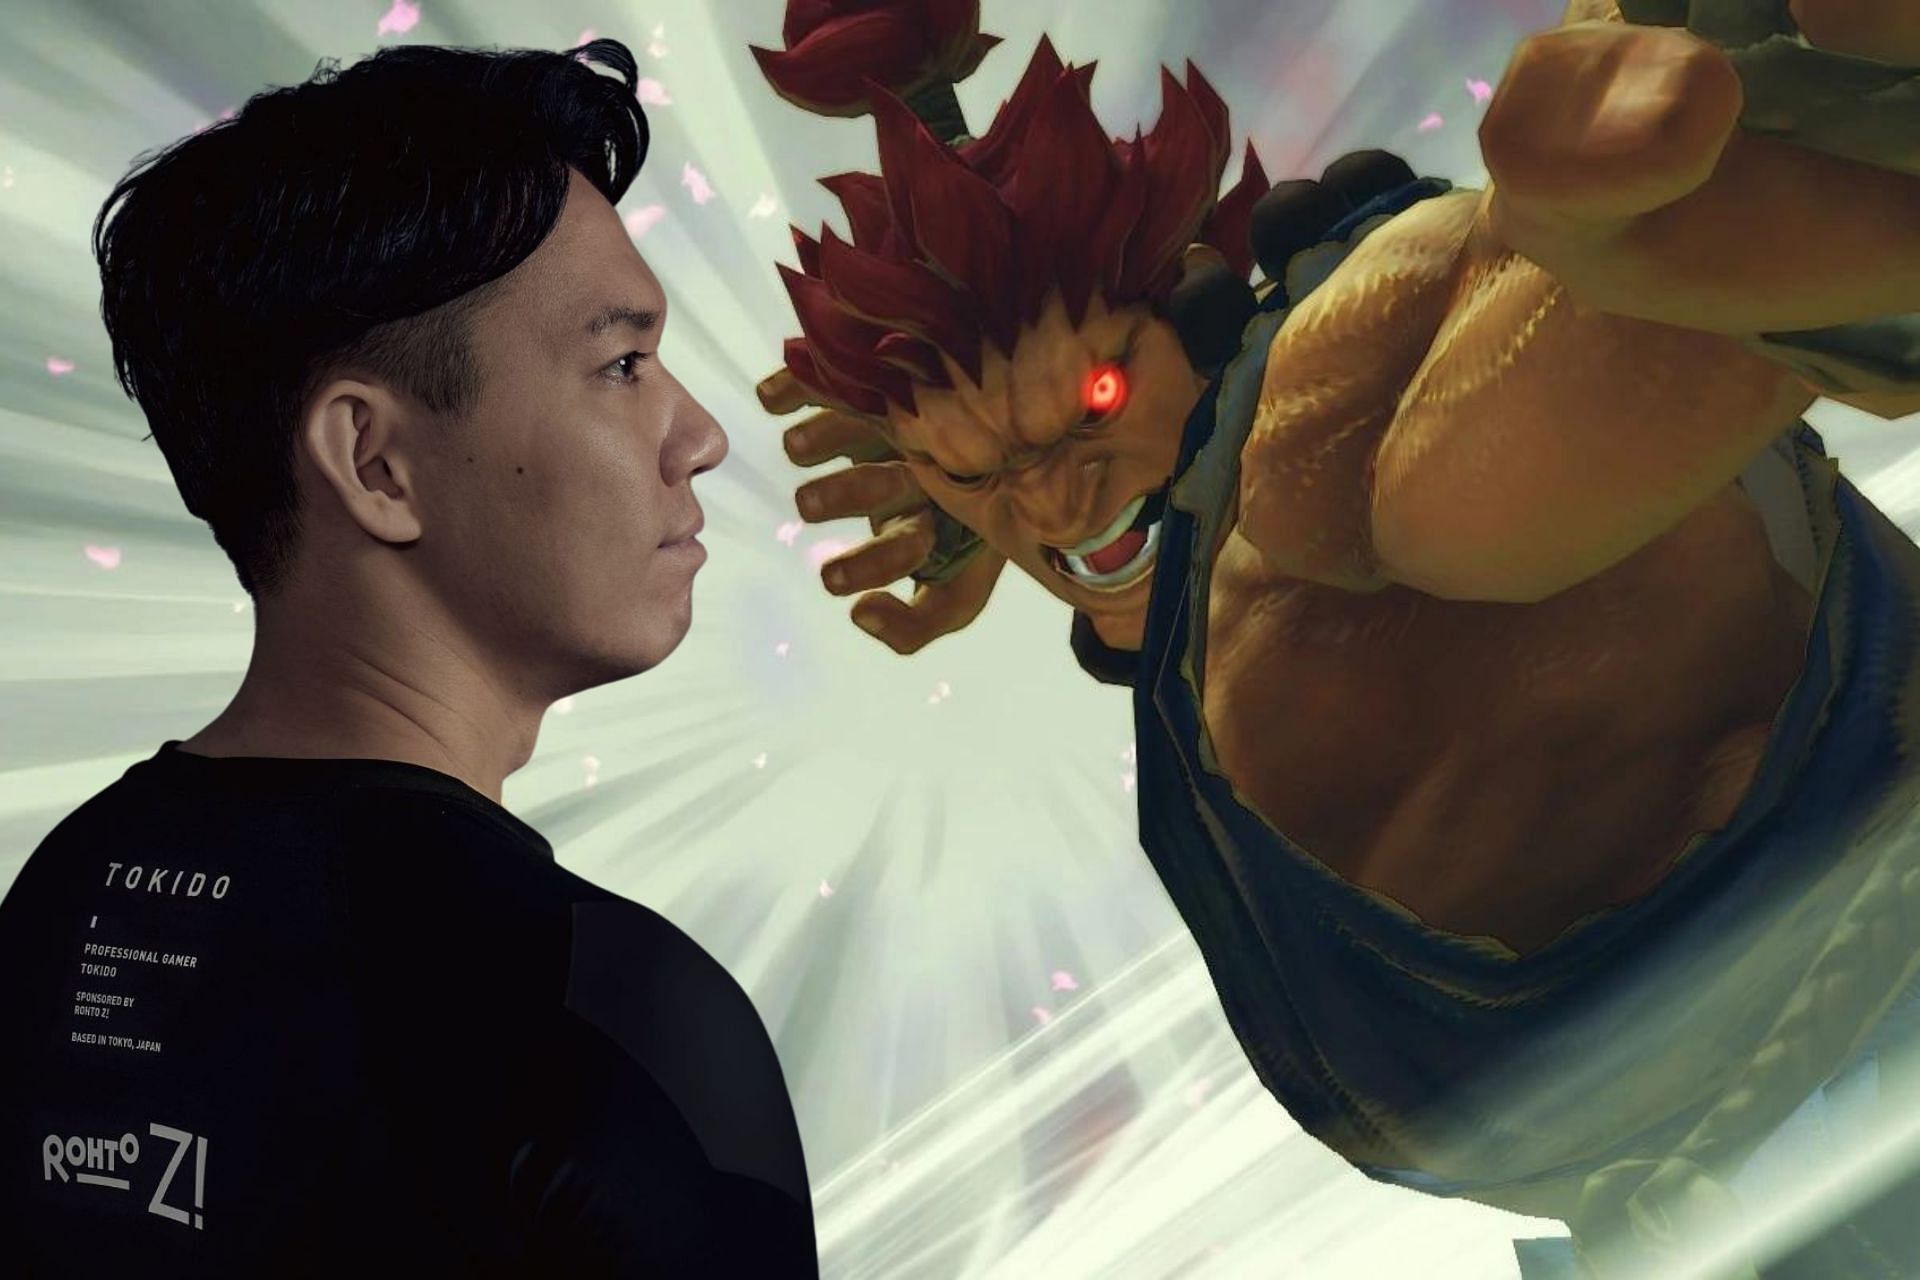 Who is Murderface? Tokido speaks to Sportskeeda about his career and more.